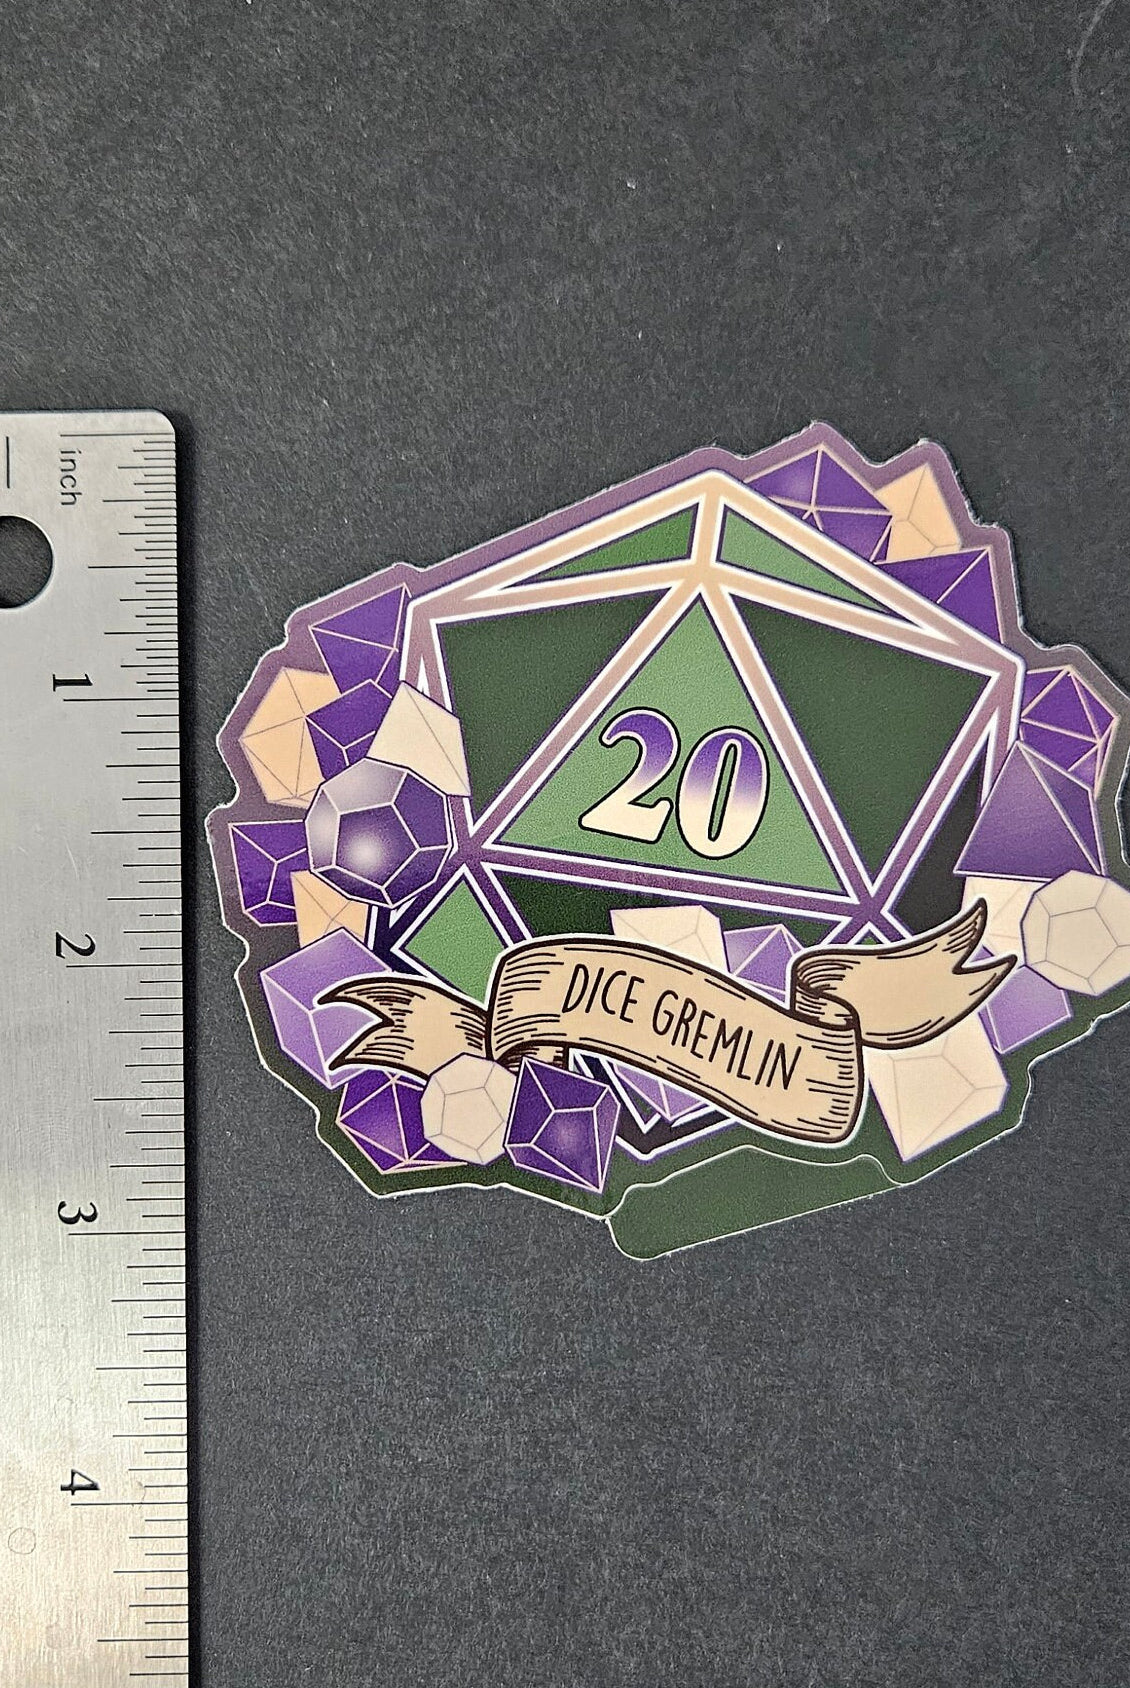 GLOSSY STICKER: D20 The Dice Gremlin , Dice Gremlin D20 Sticker , D20 Stickers, D20 Sticker , D20 Dice Gremlin Sticker , Player Type D20